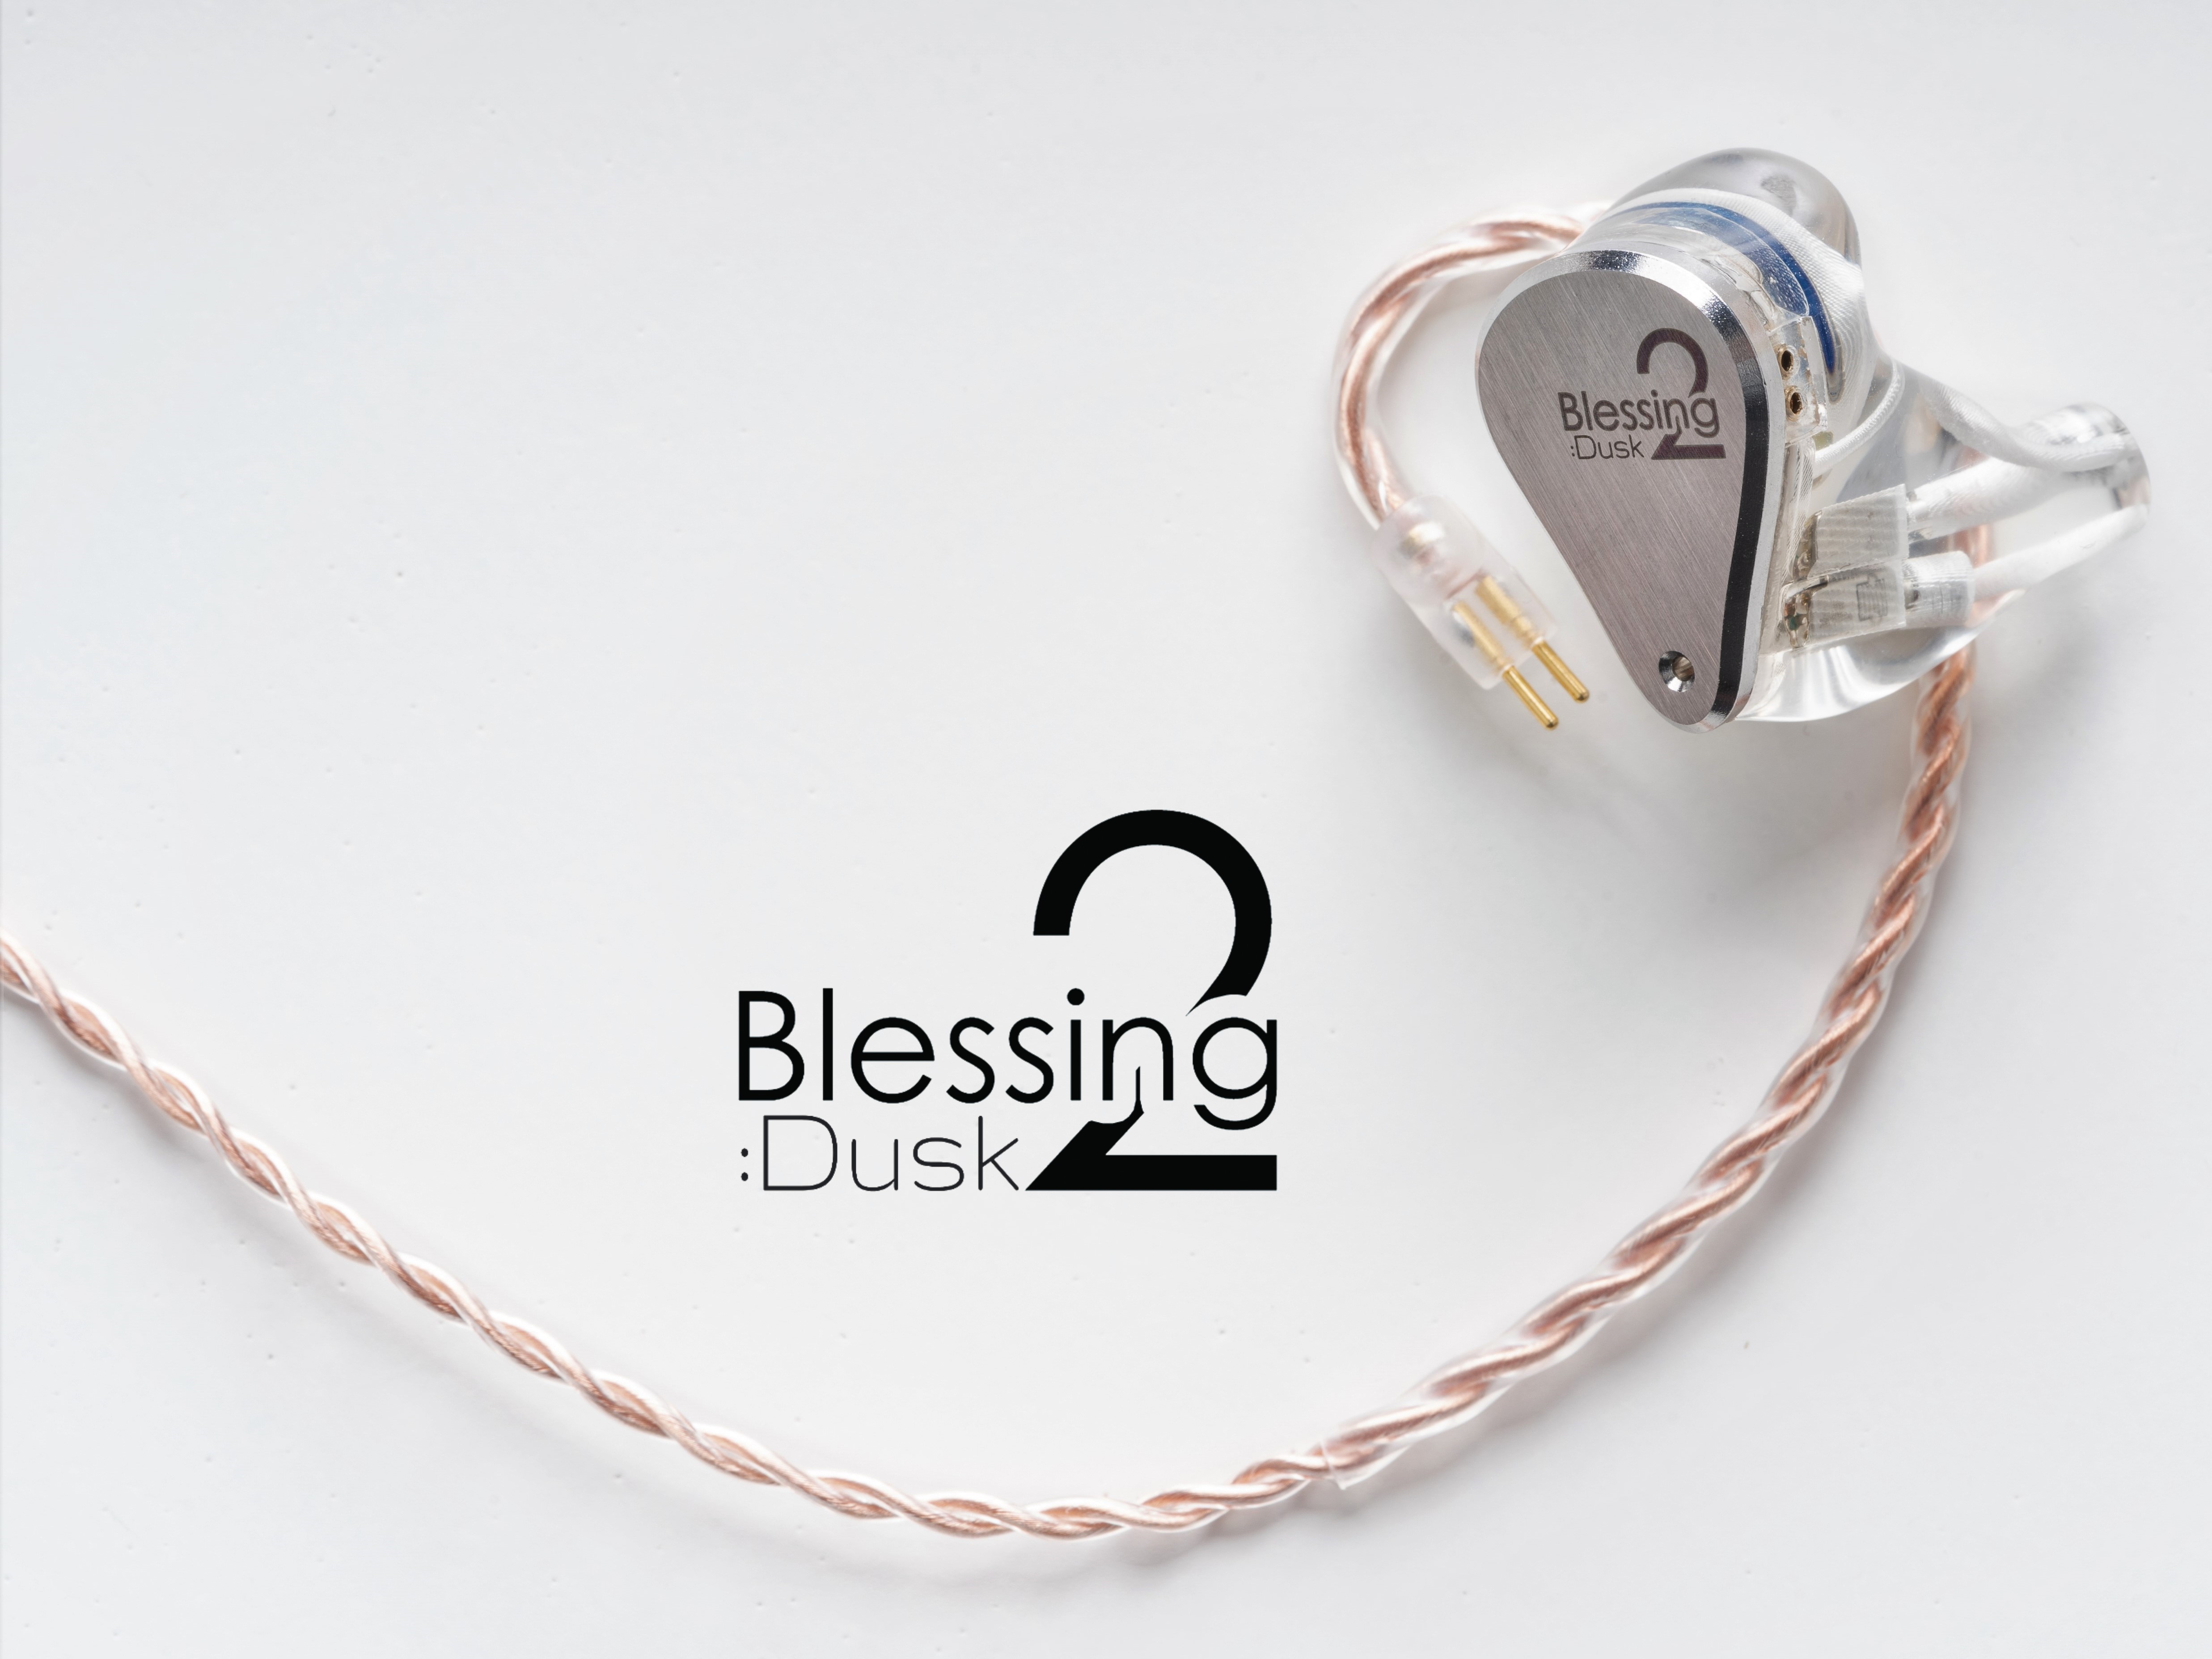 Behind the Scenes: Moondrop x crinacle Blessing2:Dusk – In-Ear